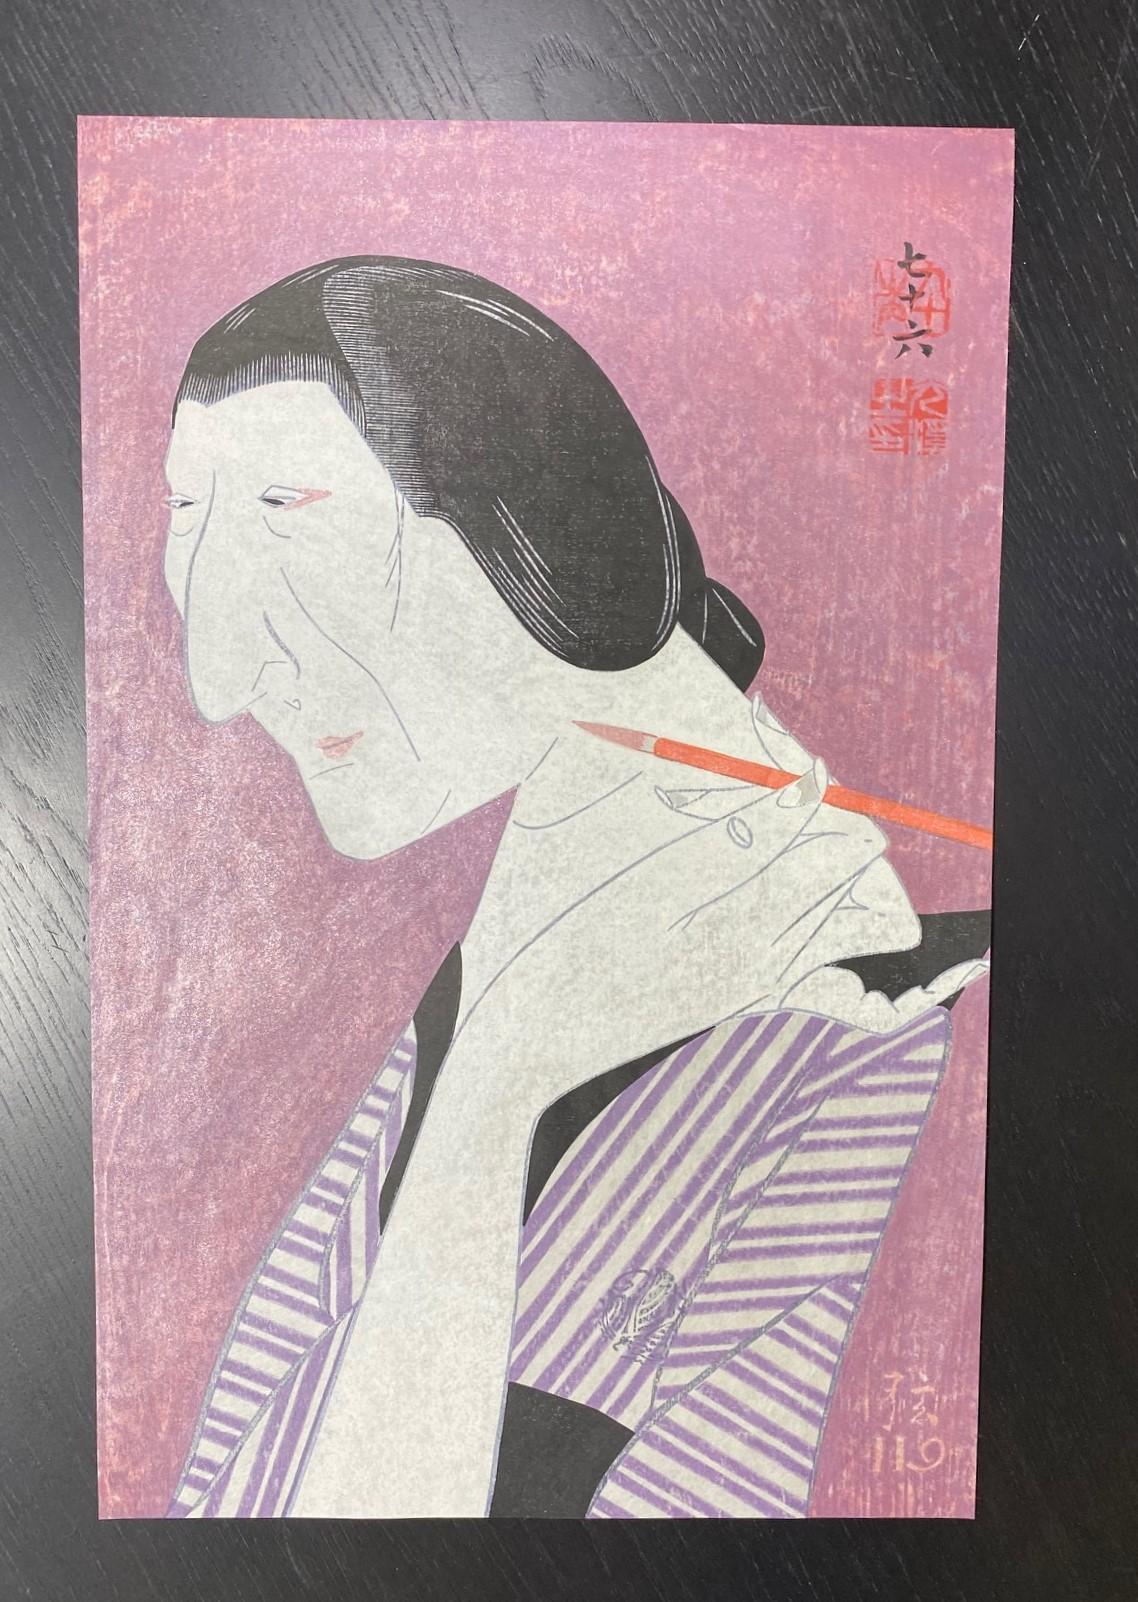 A wonderful and quite rare woodblock print by unique master Japanese artist/ printmaker Tsuruya Kokei. This work is titled 